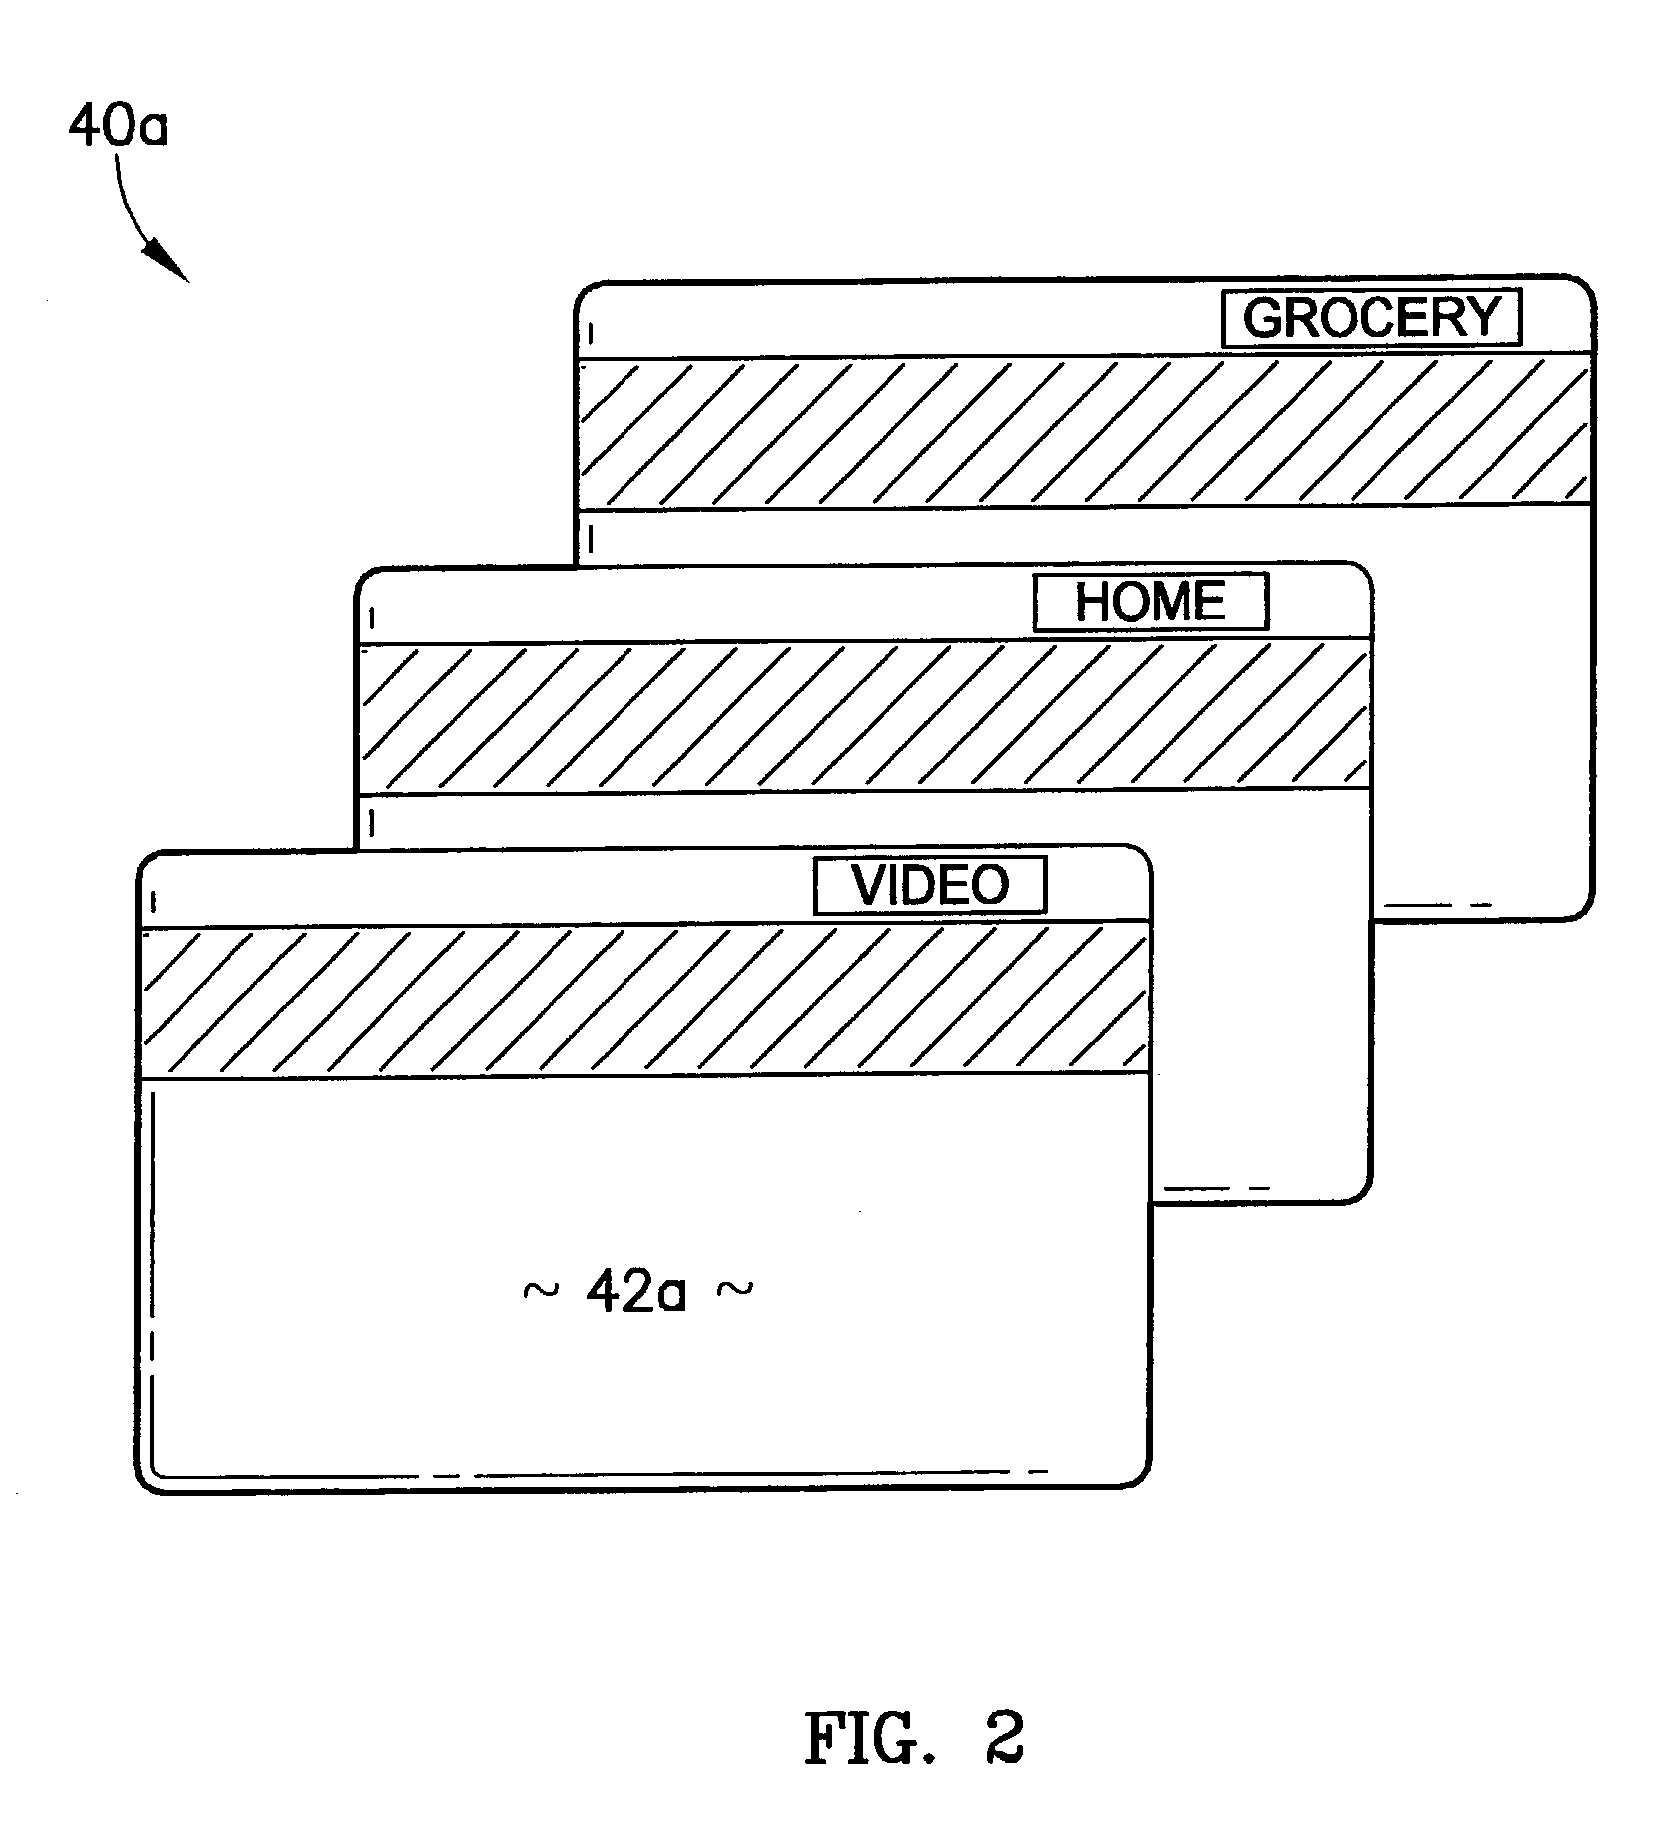 Method of exchanging coins involving non-cash exchange options